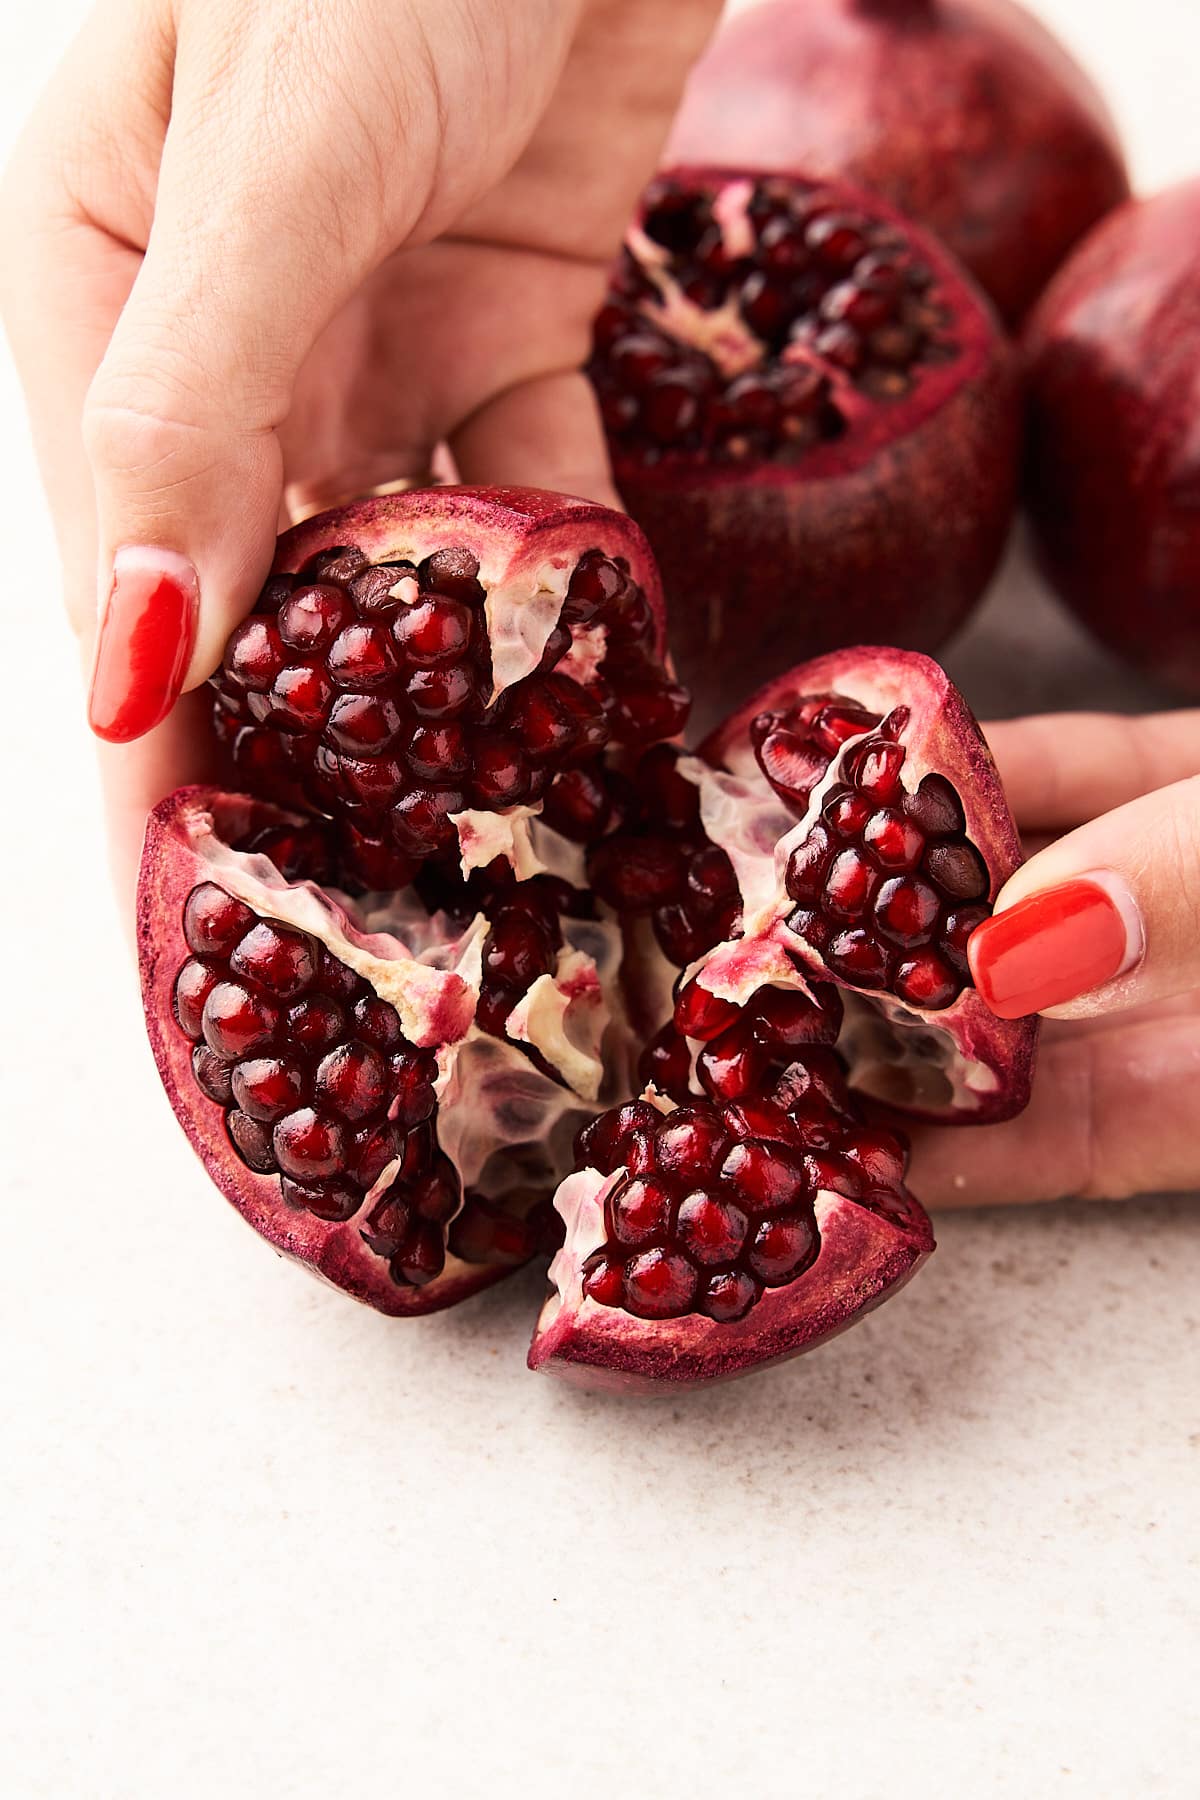 Pulling pomegranate sections apart.